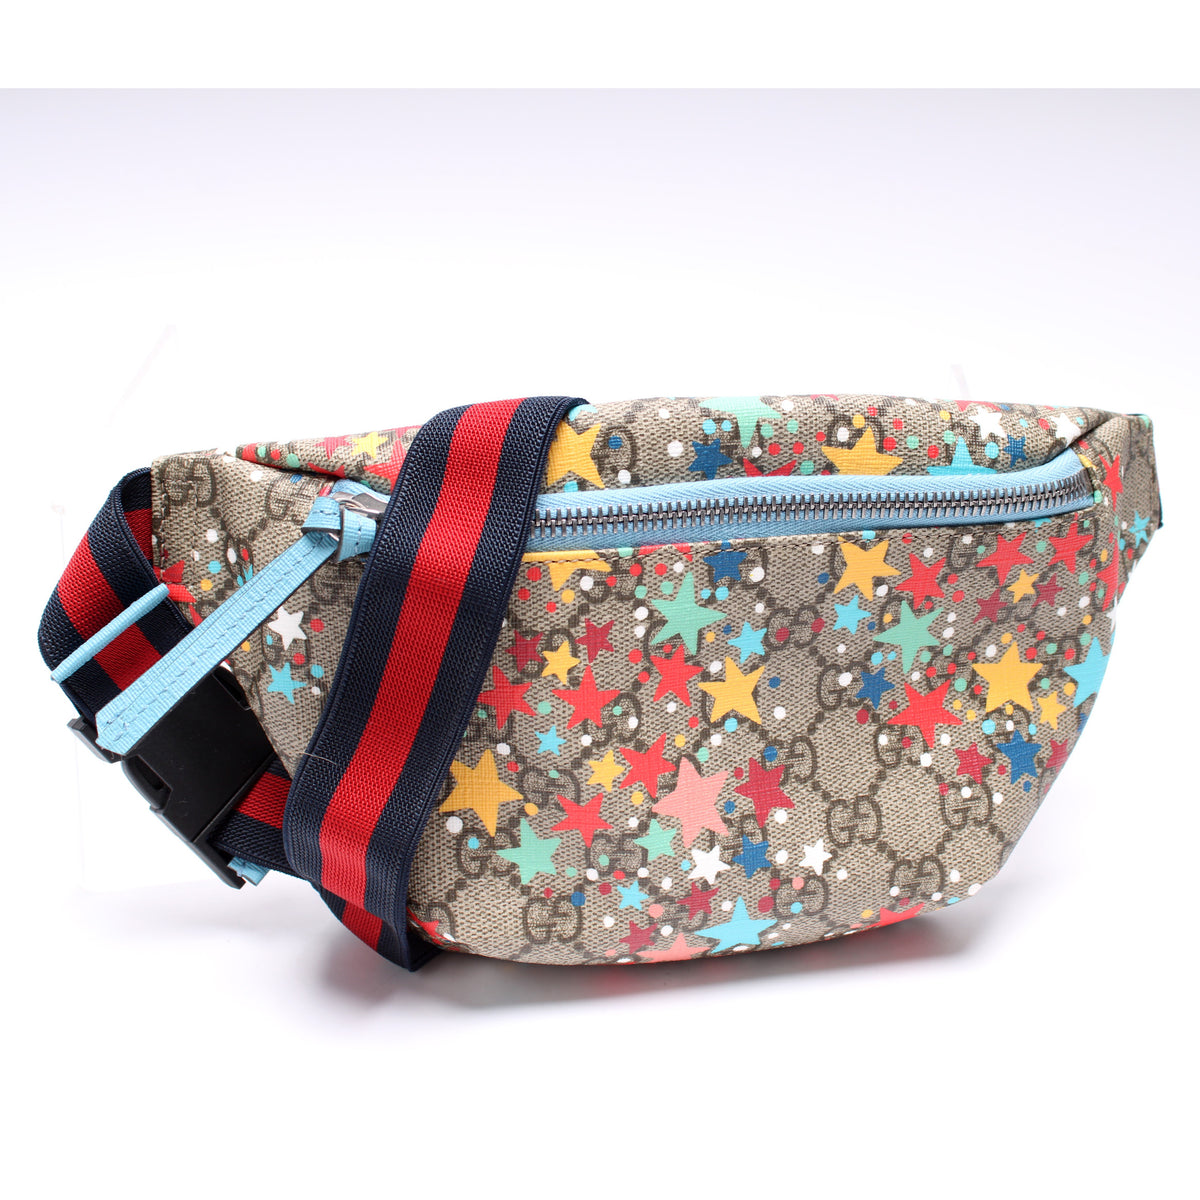 Children's star belt bag in red and white cotton